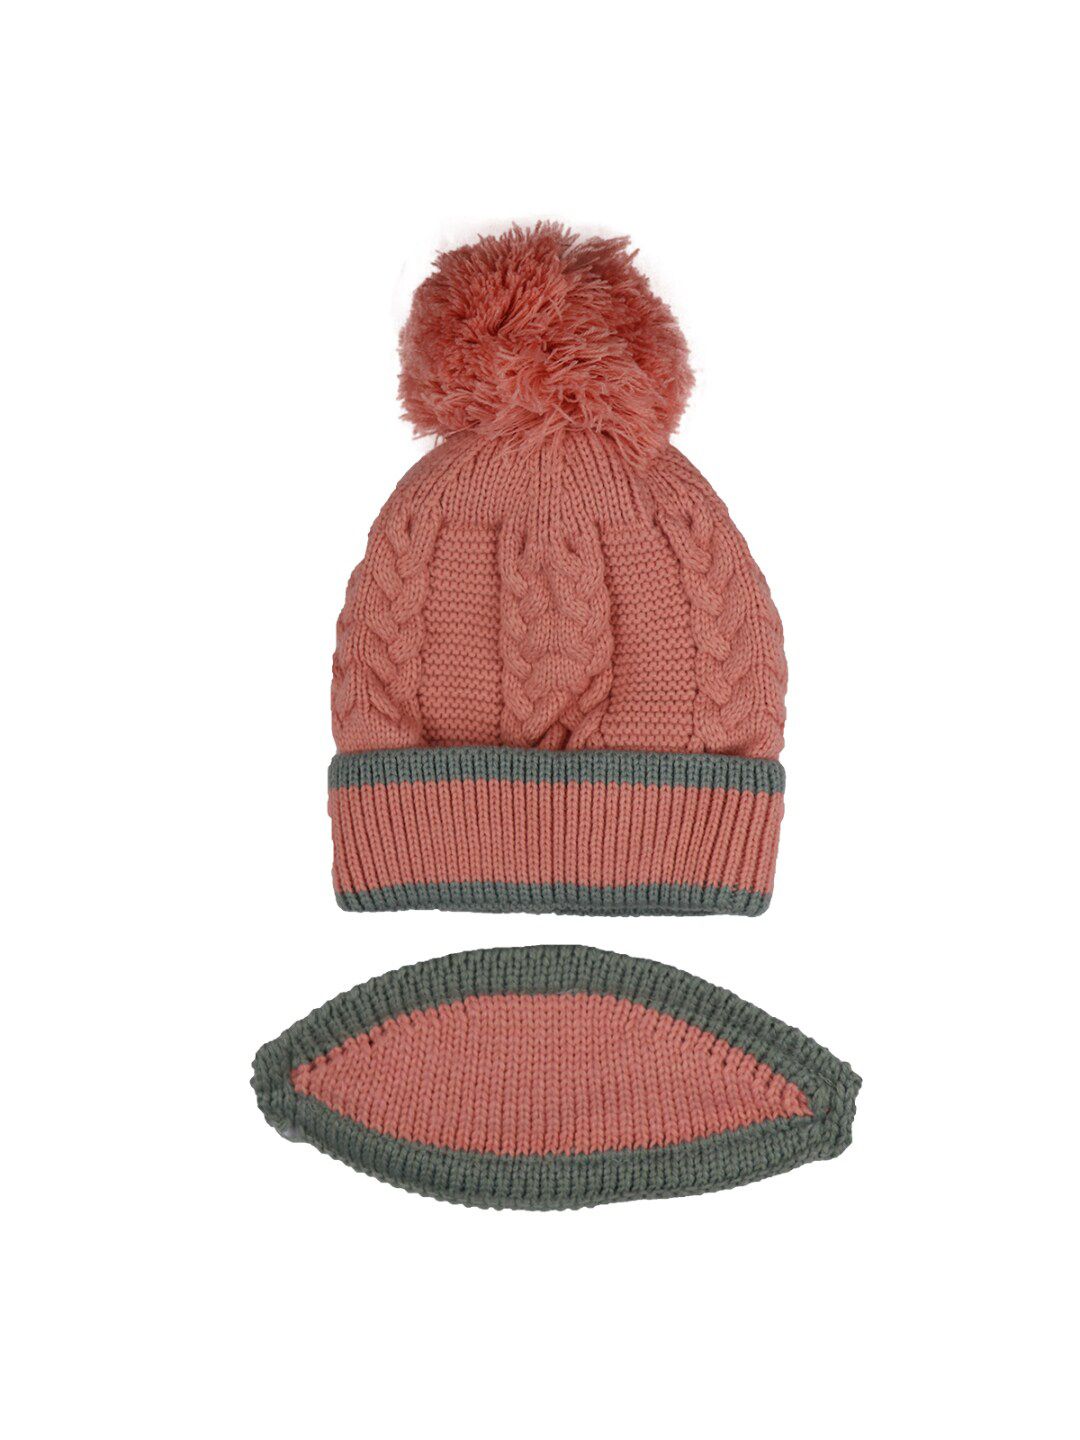 iSWEVEN Unisex Pink & Grey Beanie Price in India